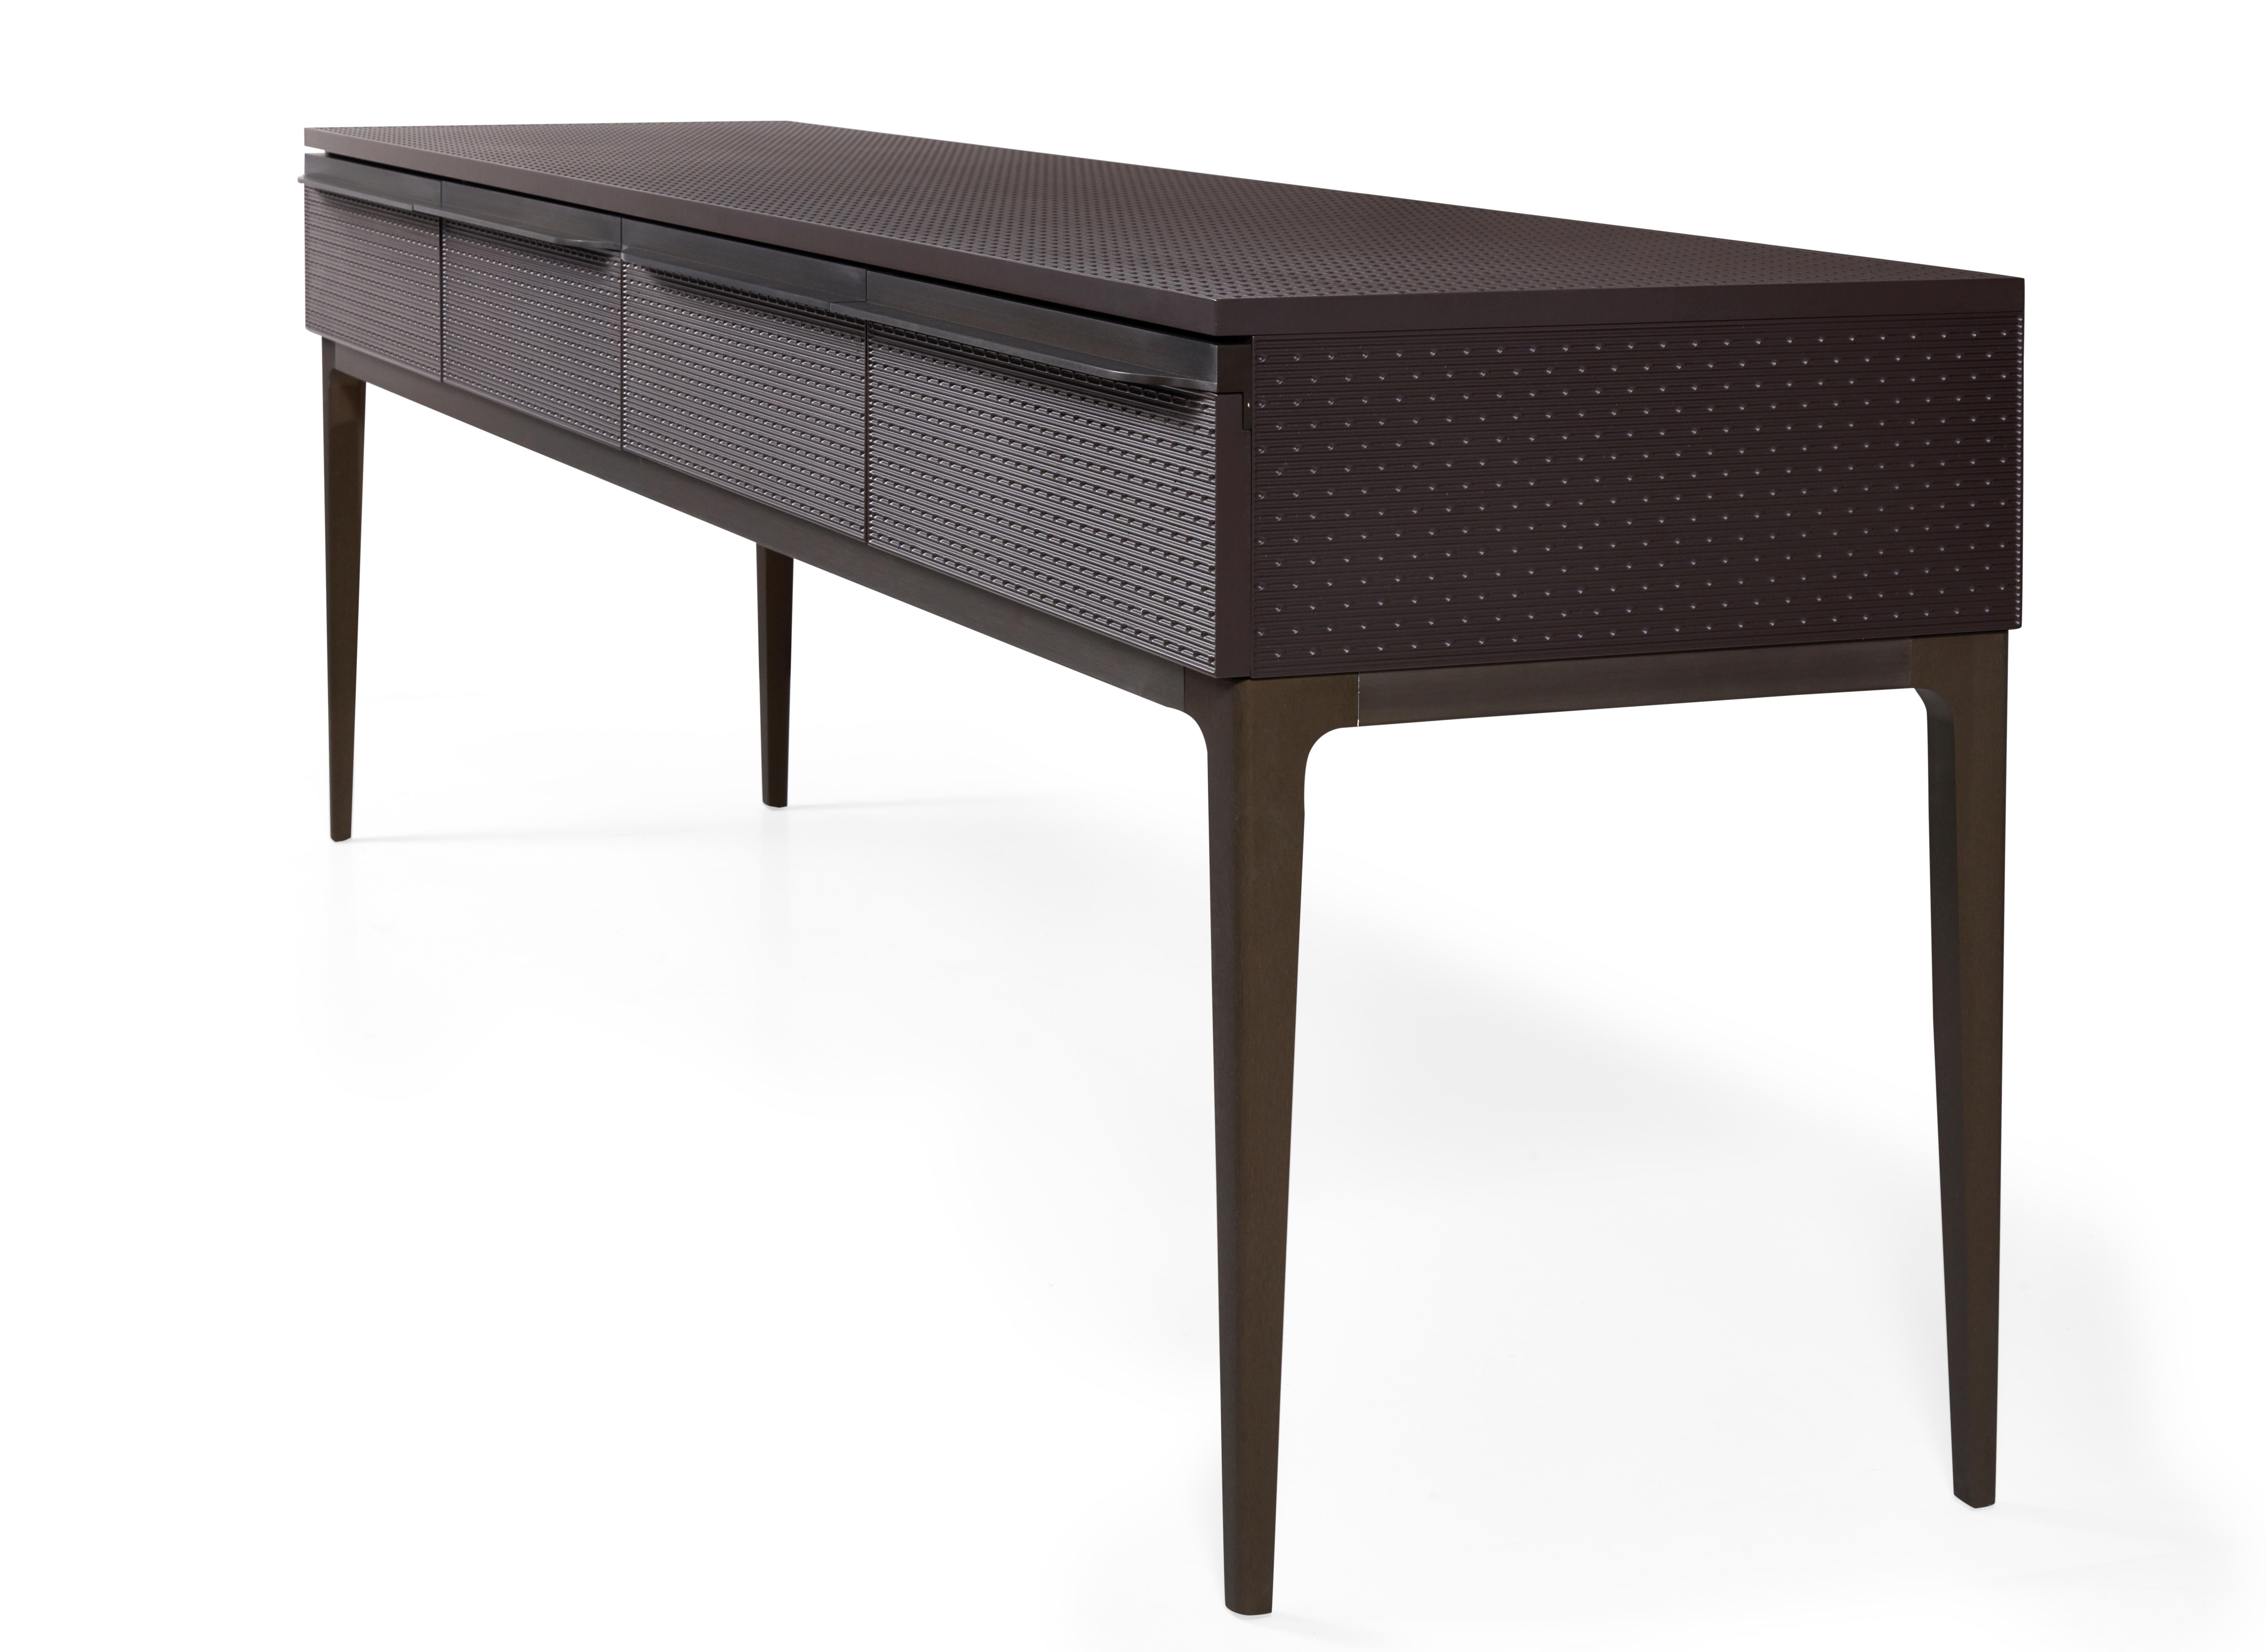 Adding to the charm of this collection, is a console that is as elegant as it is unassuming. The combination of wood, metal and lacquer allow for endless style possibilities, and open this console up for use in almost any room.